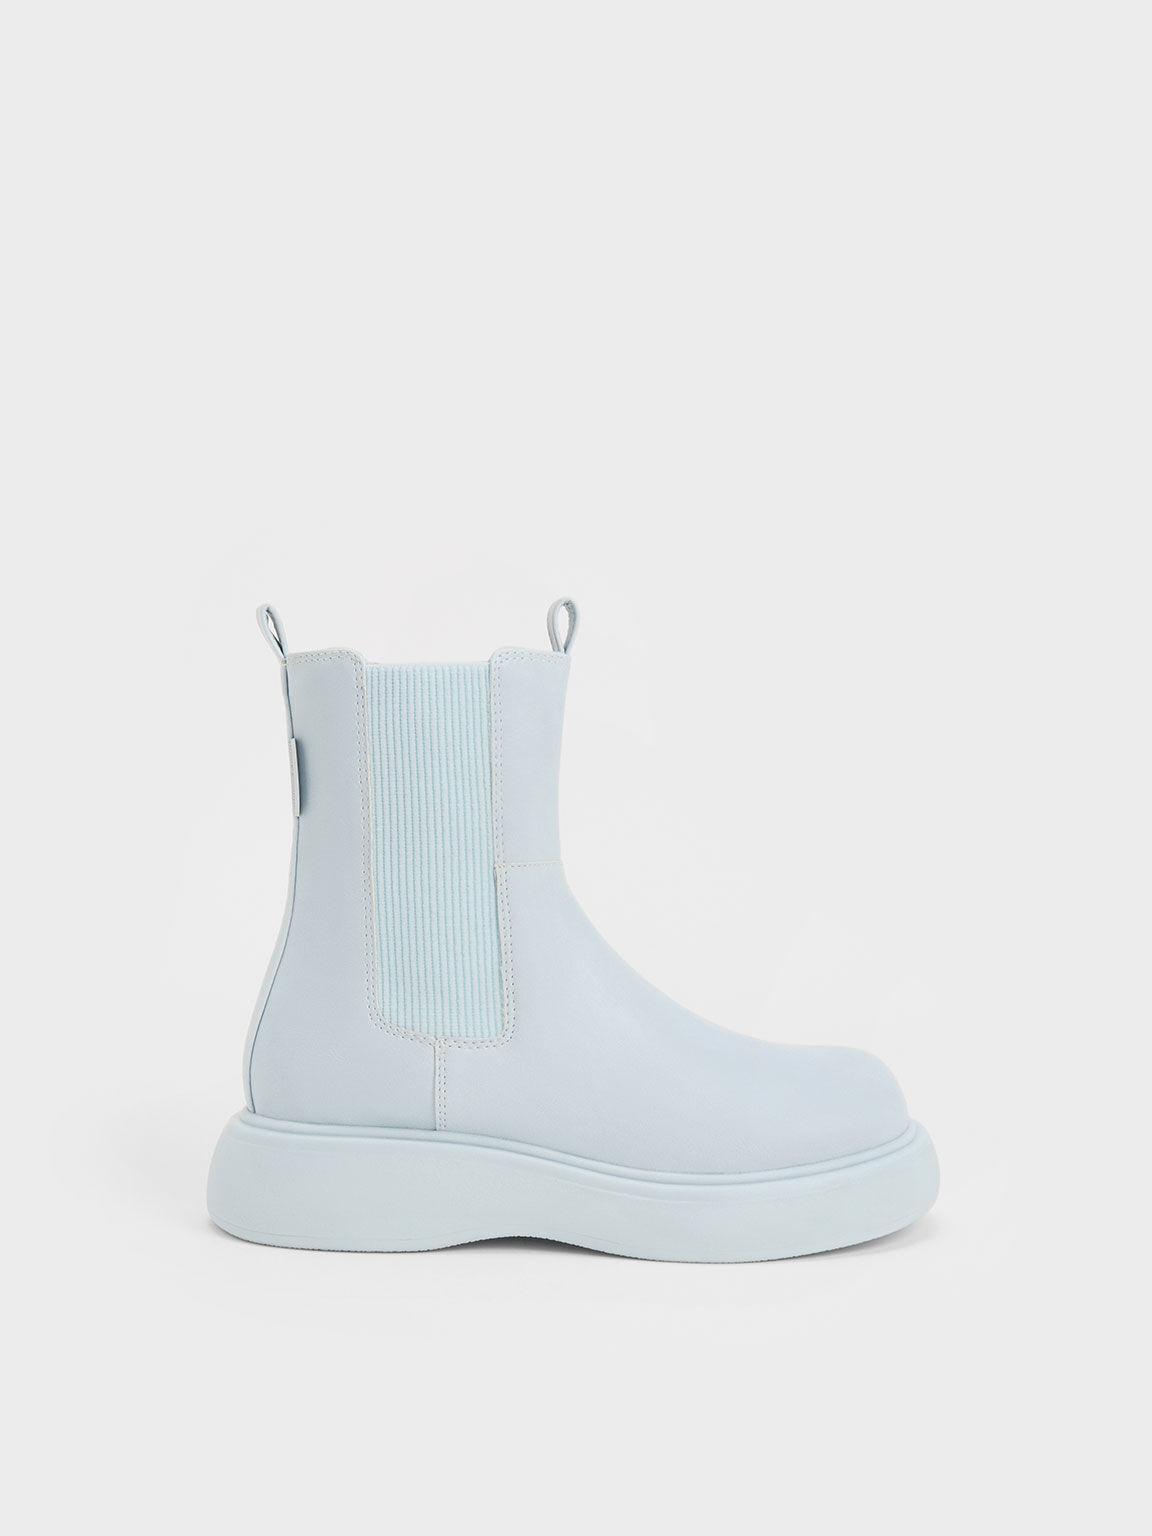 Double Pull Tab Chelsea Boots, Light Blue, hi-res